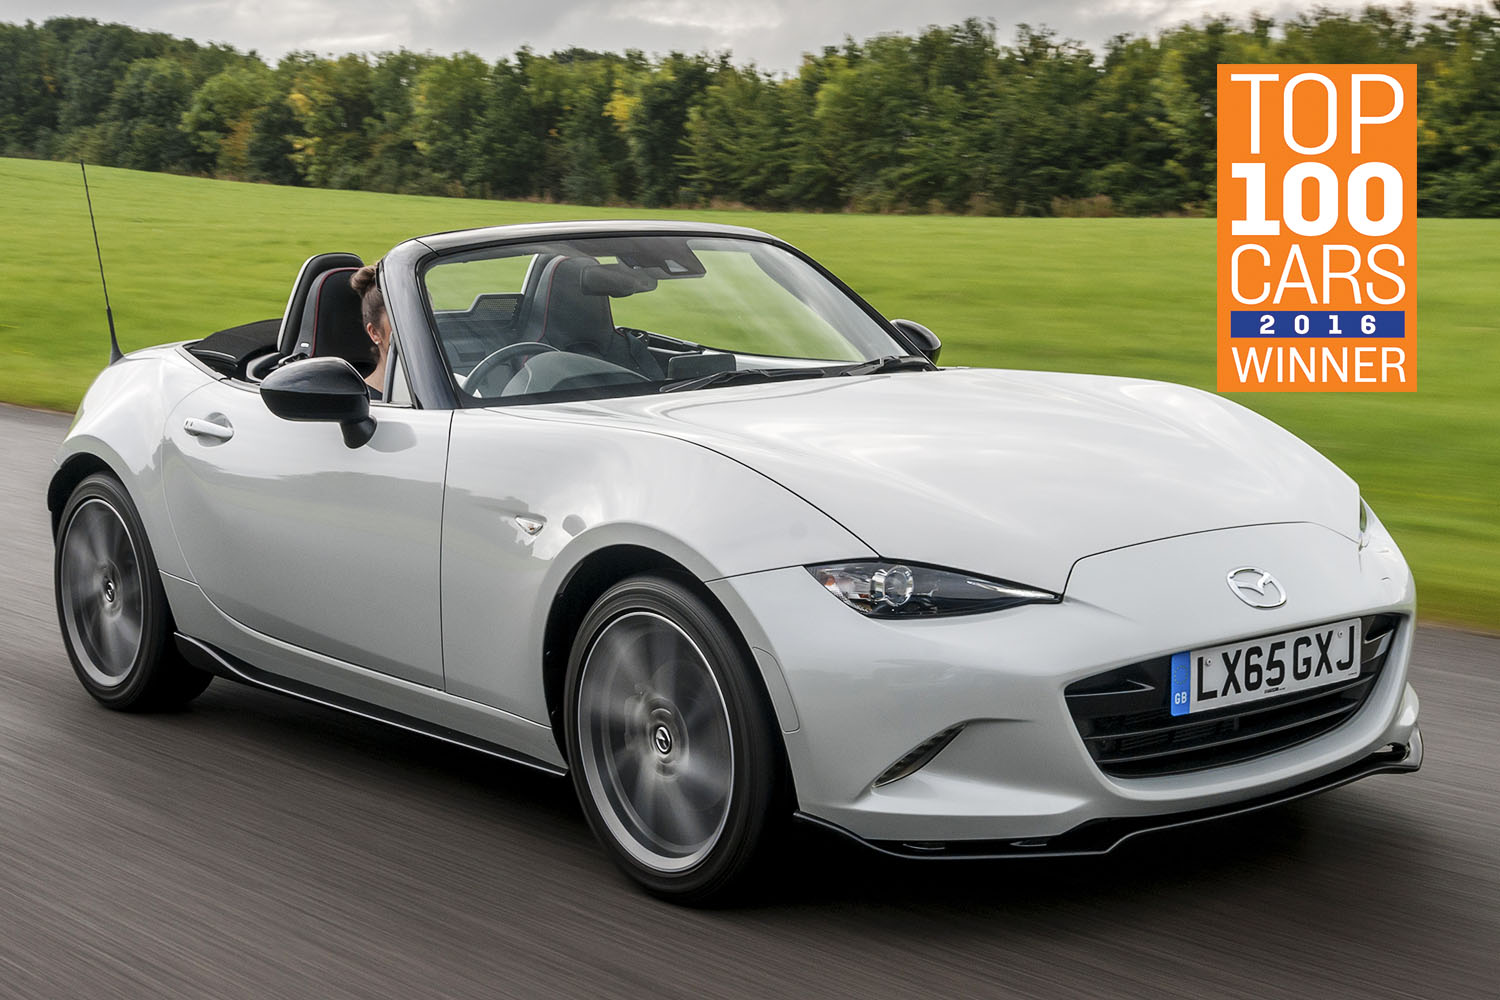 Mazda MX-5: The Sunday Times Top 100 Cars - Top 5 Roadsters